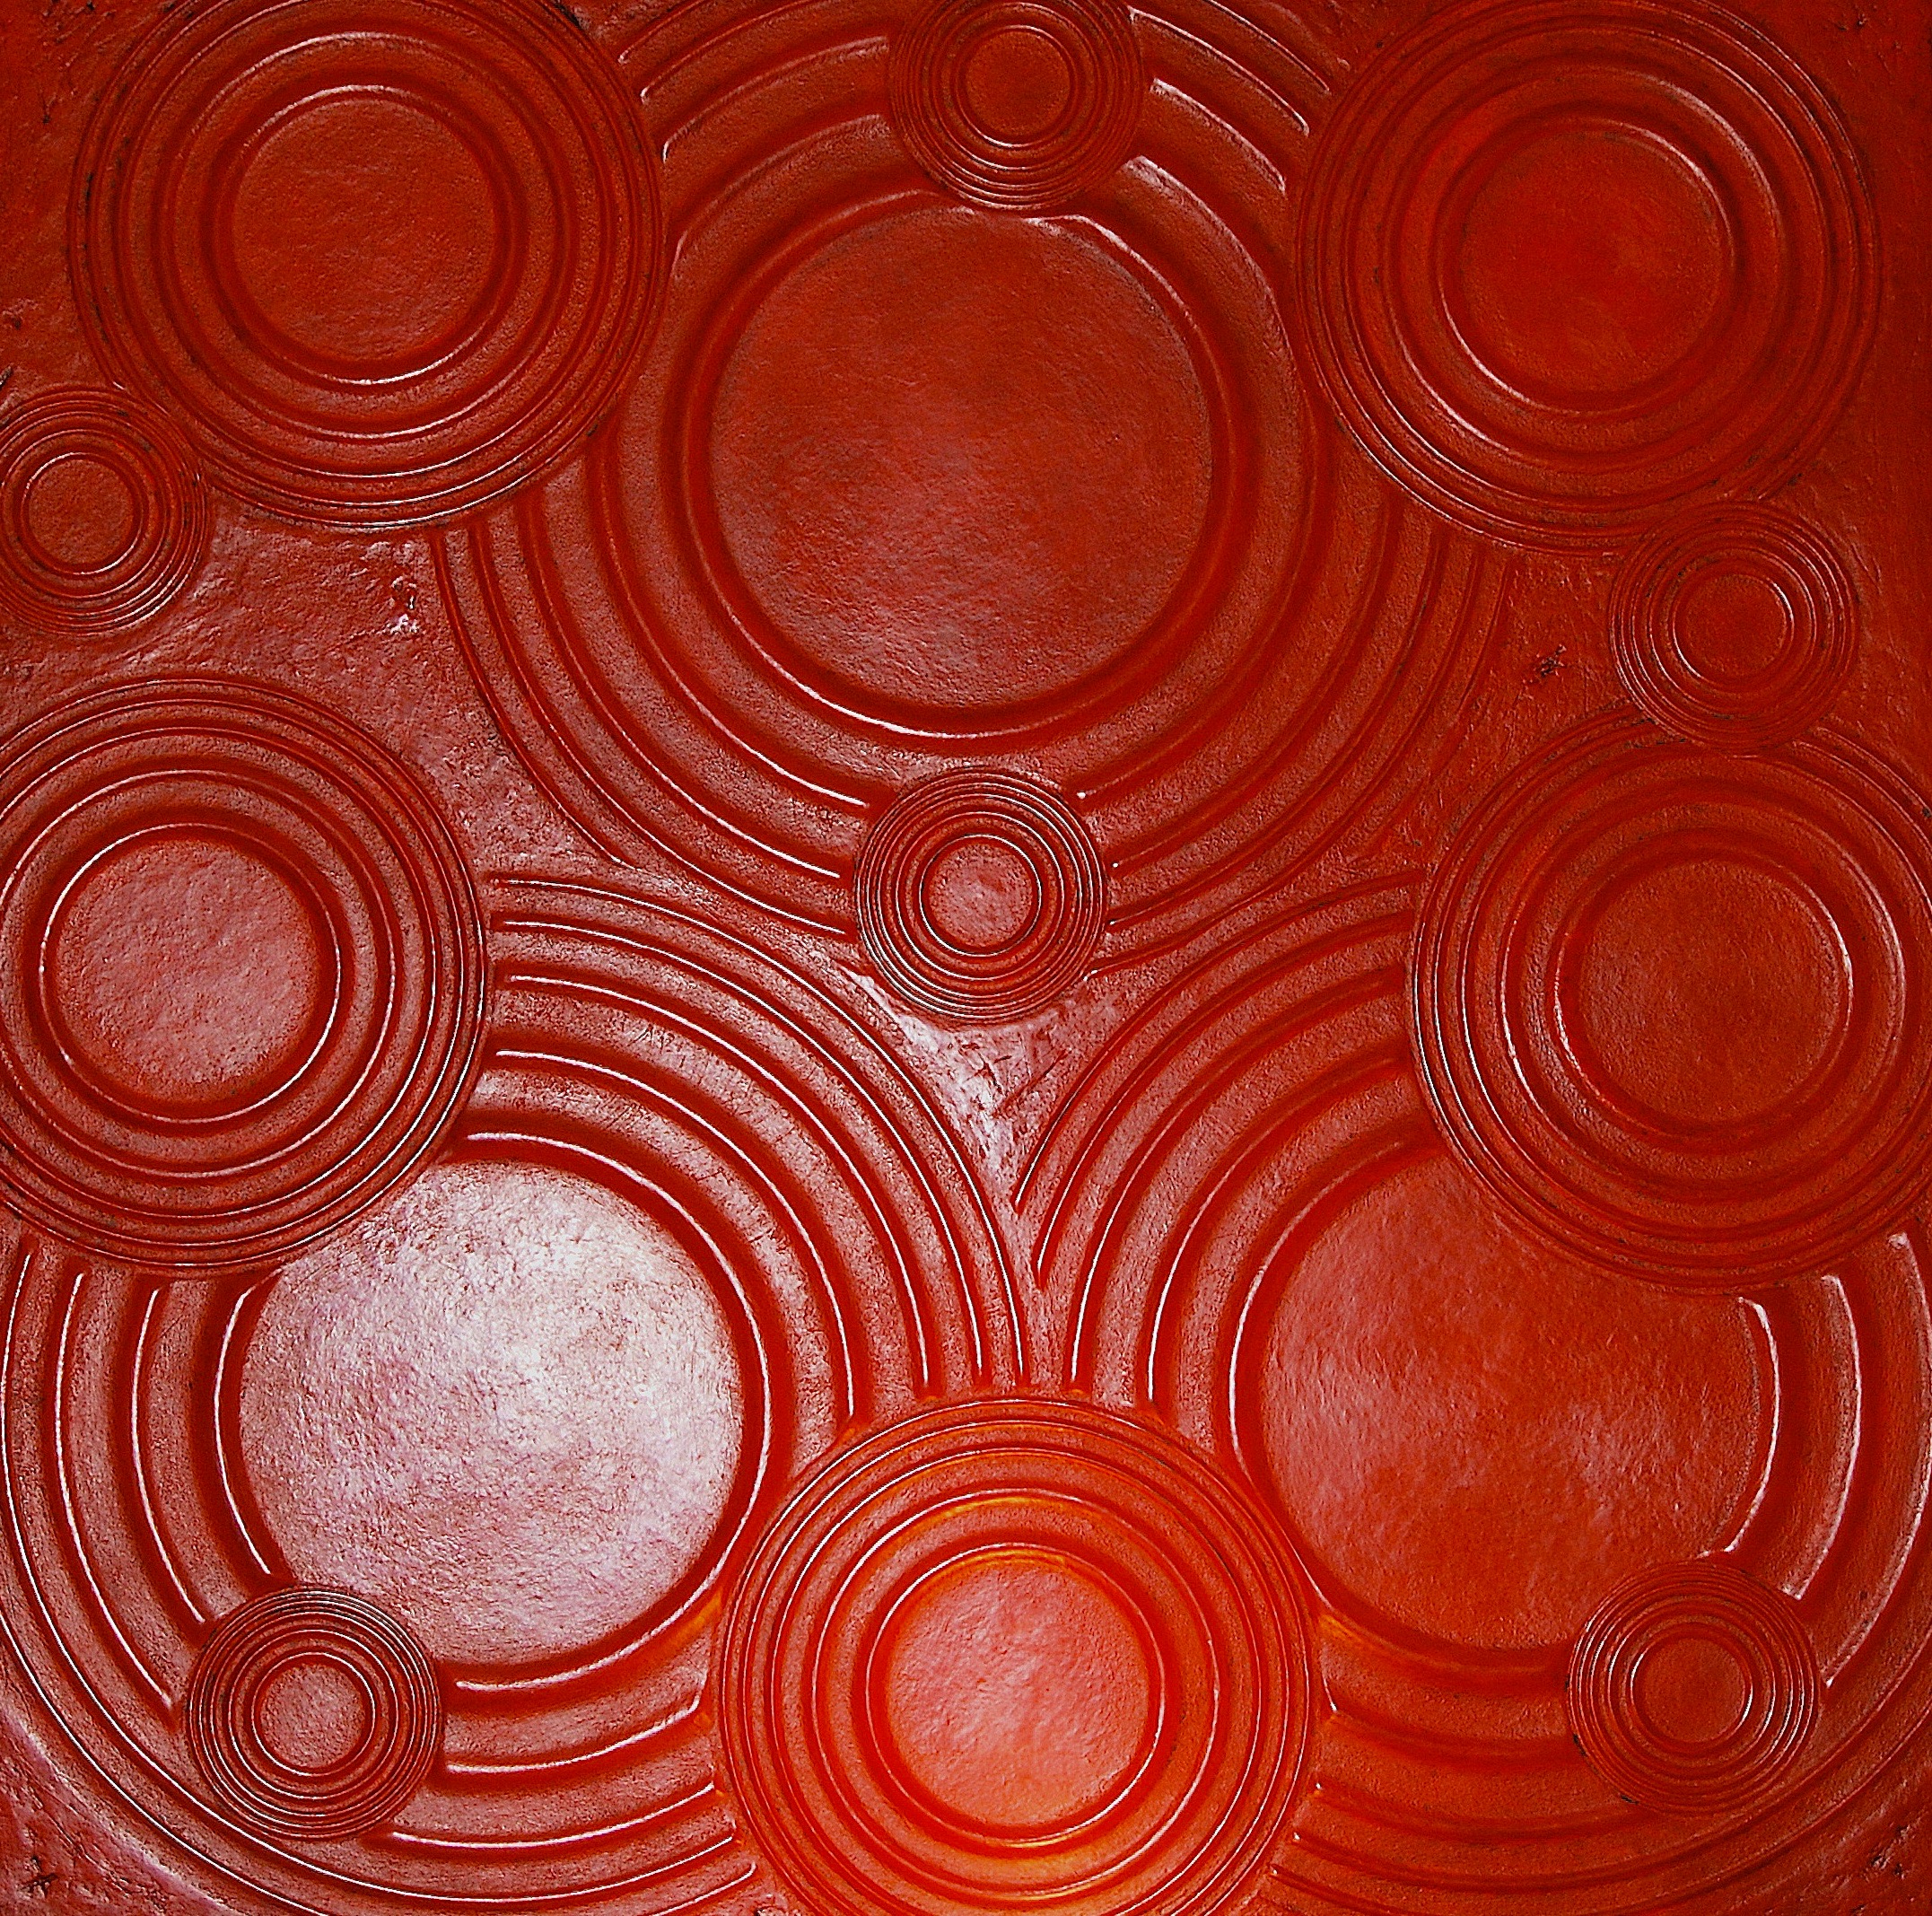 Thomas Coffin - Ripple Effect (red), 36"h x 36"w x 2"d, mixed media sculptural wall relief